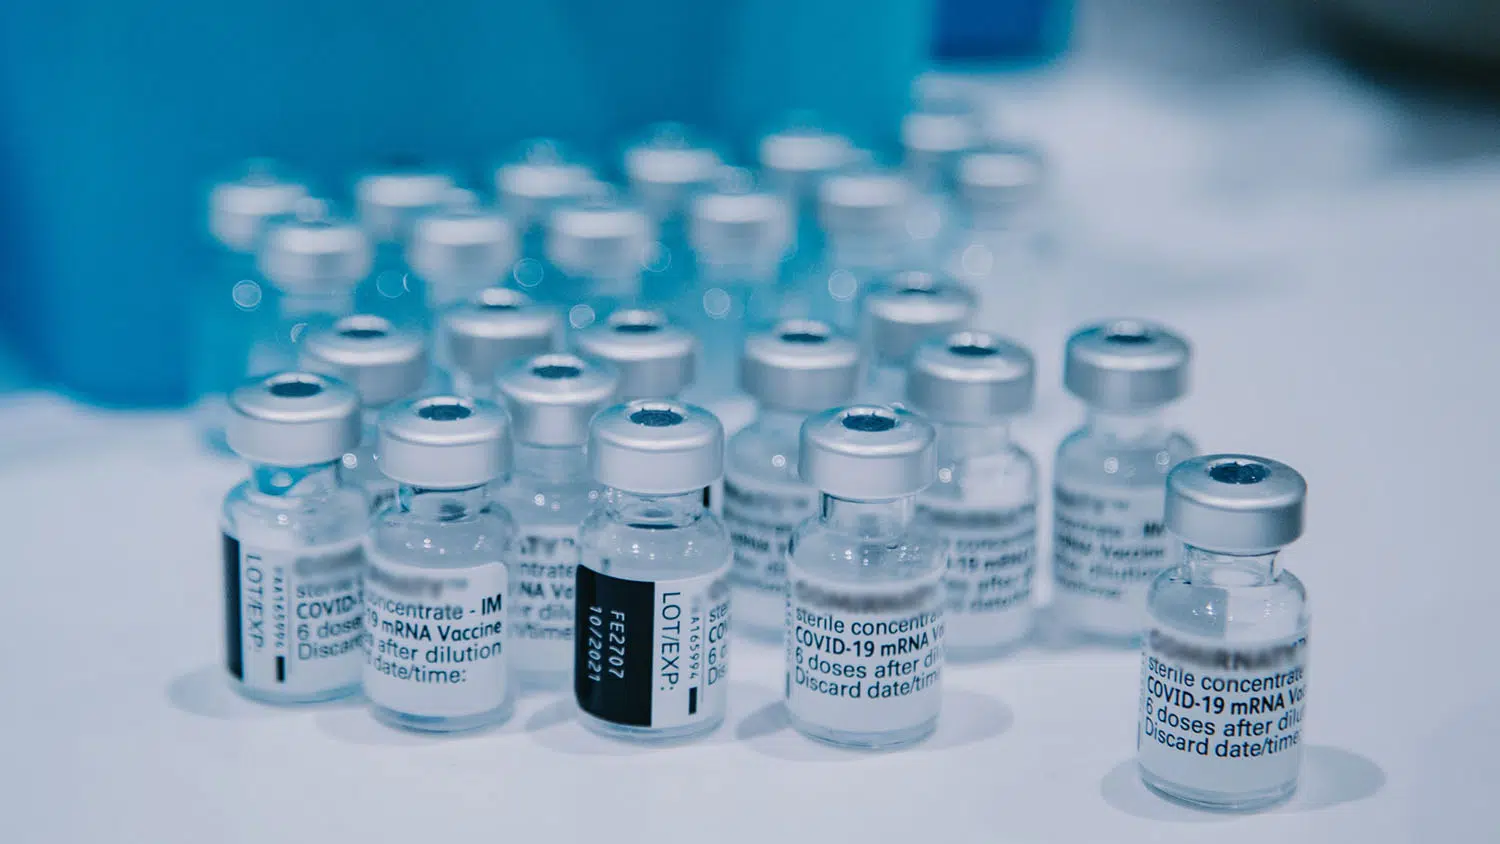 Close-up photo of a group of vaccine vials.